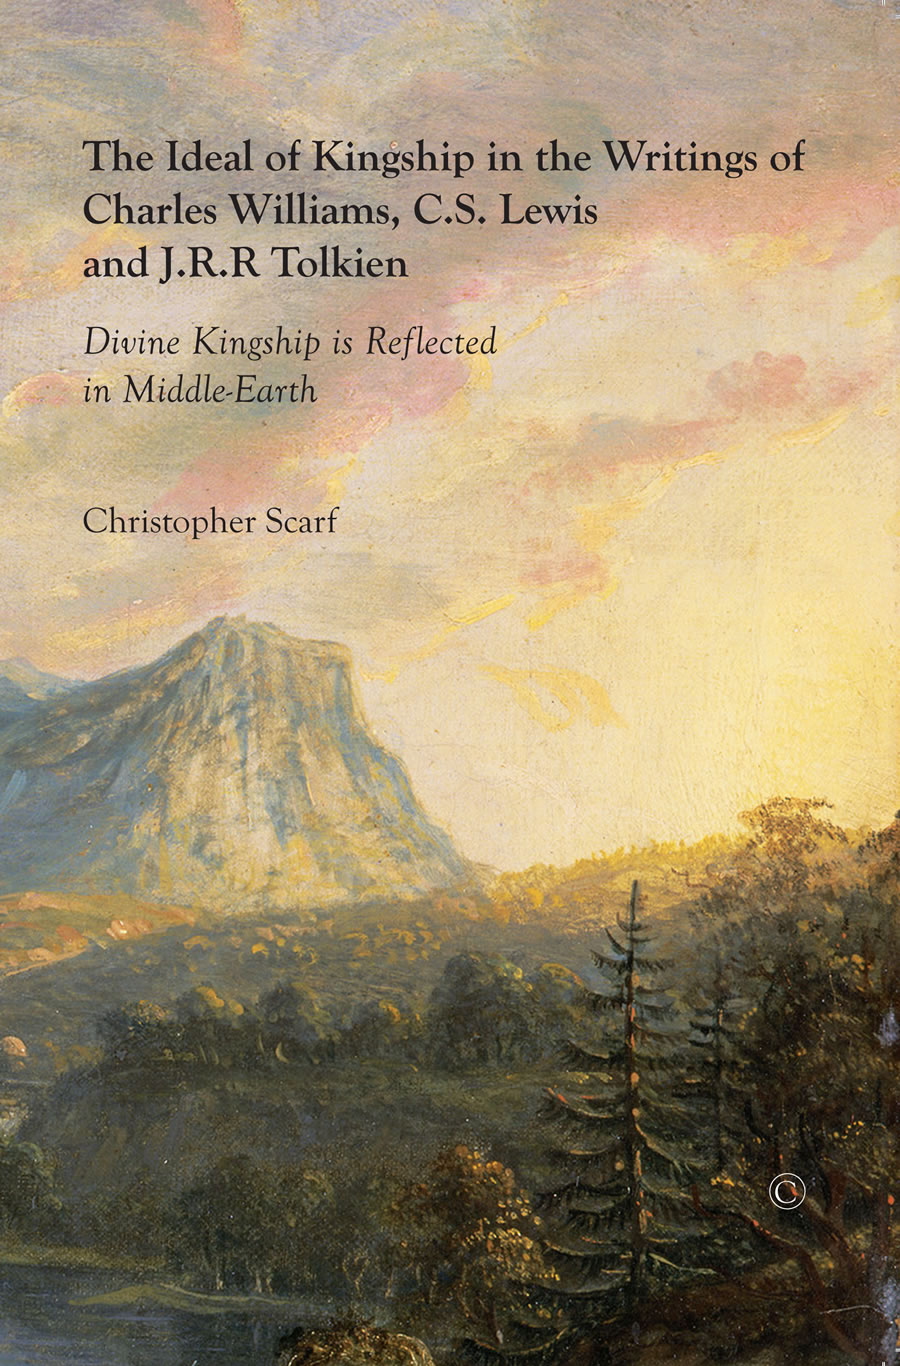 The Ideal of Kingship in the Writings of Charles Williams, C.S. Lewis, and J.R.R. Tolkien by Christopher Scarf 